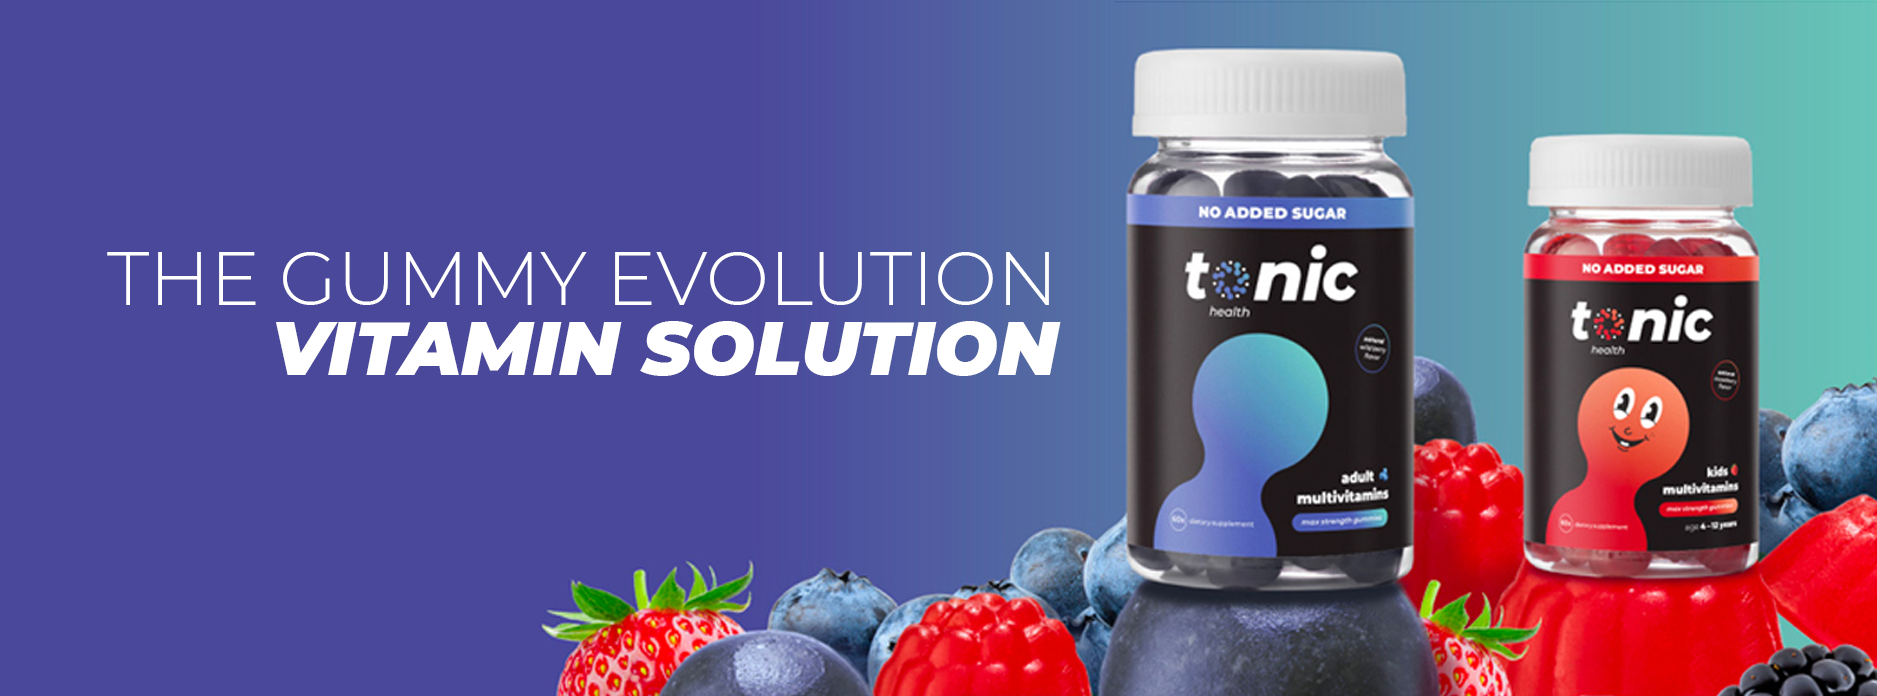 Access exclusive deals, coupons, offers and cashback on Boost Your Immune System with Tonic Health Supplements through OODLZ courtesy of Tonic Health.